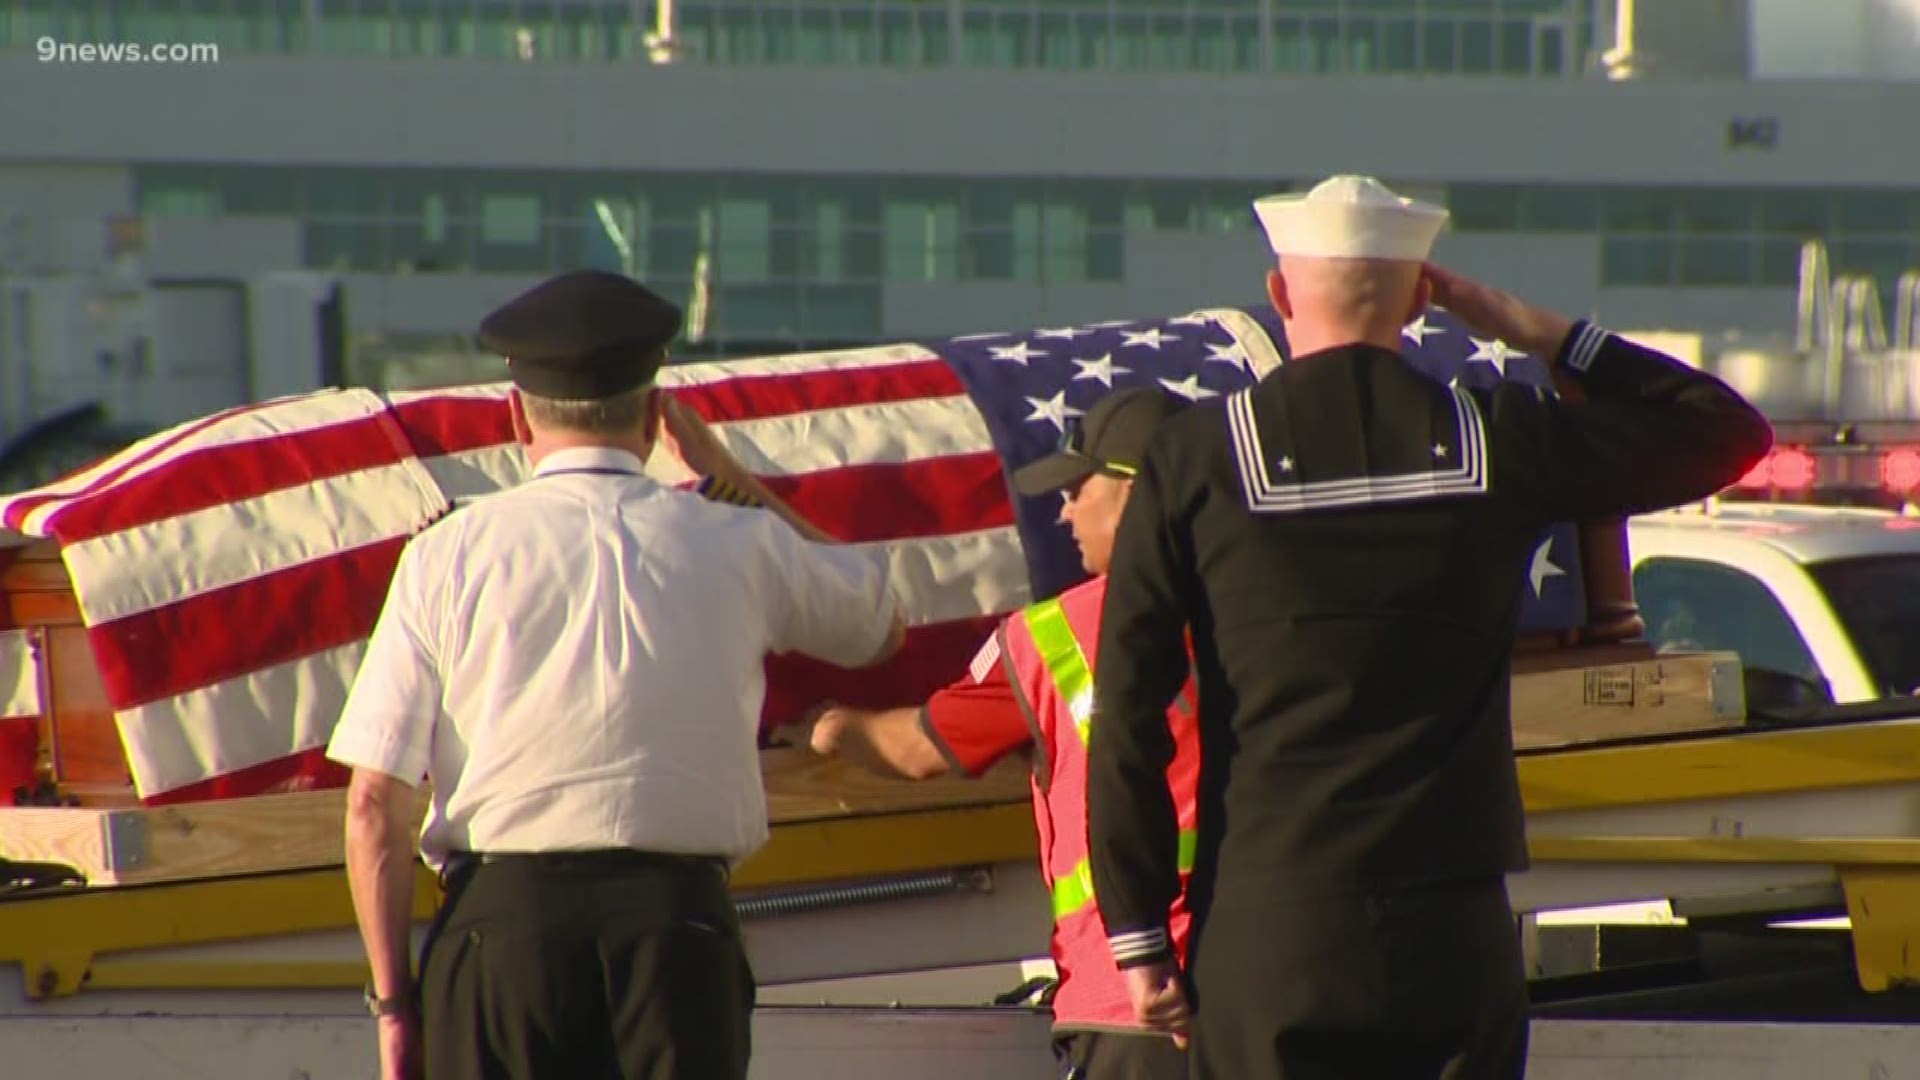 George Hanson was killed during the attack on Pearl Harbor in 1941. A procession greeted his remains at DIA Wednesday night.